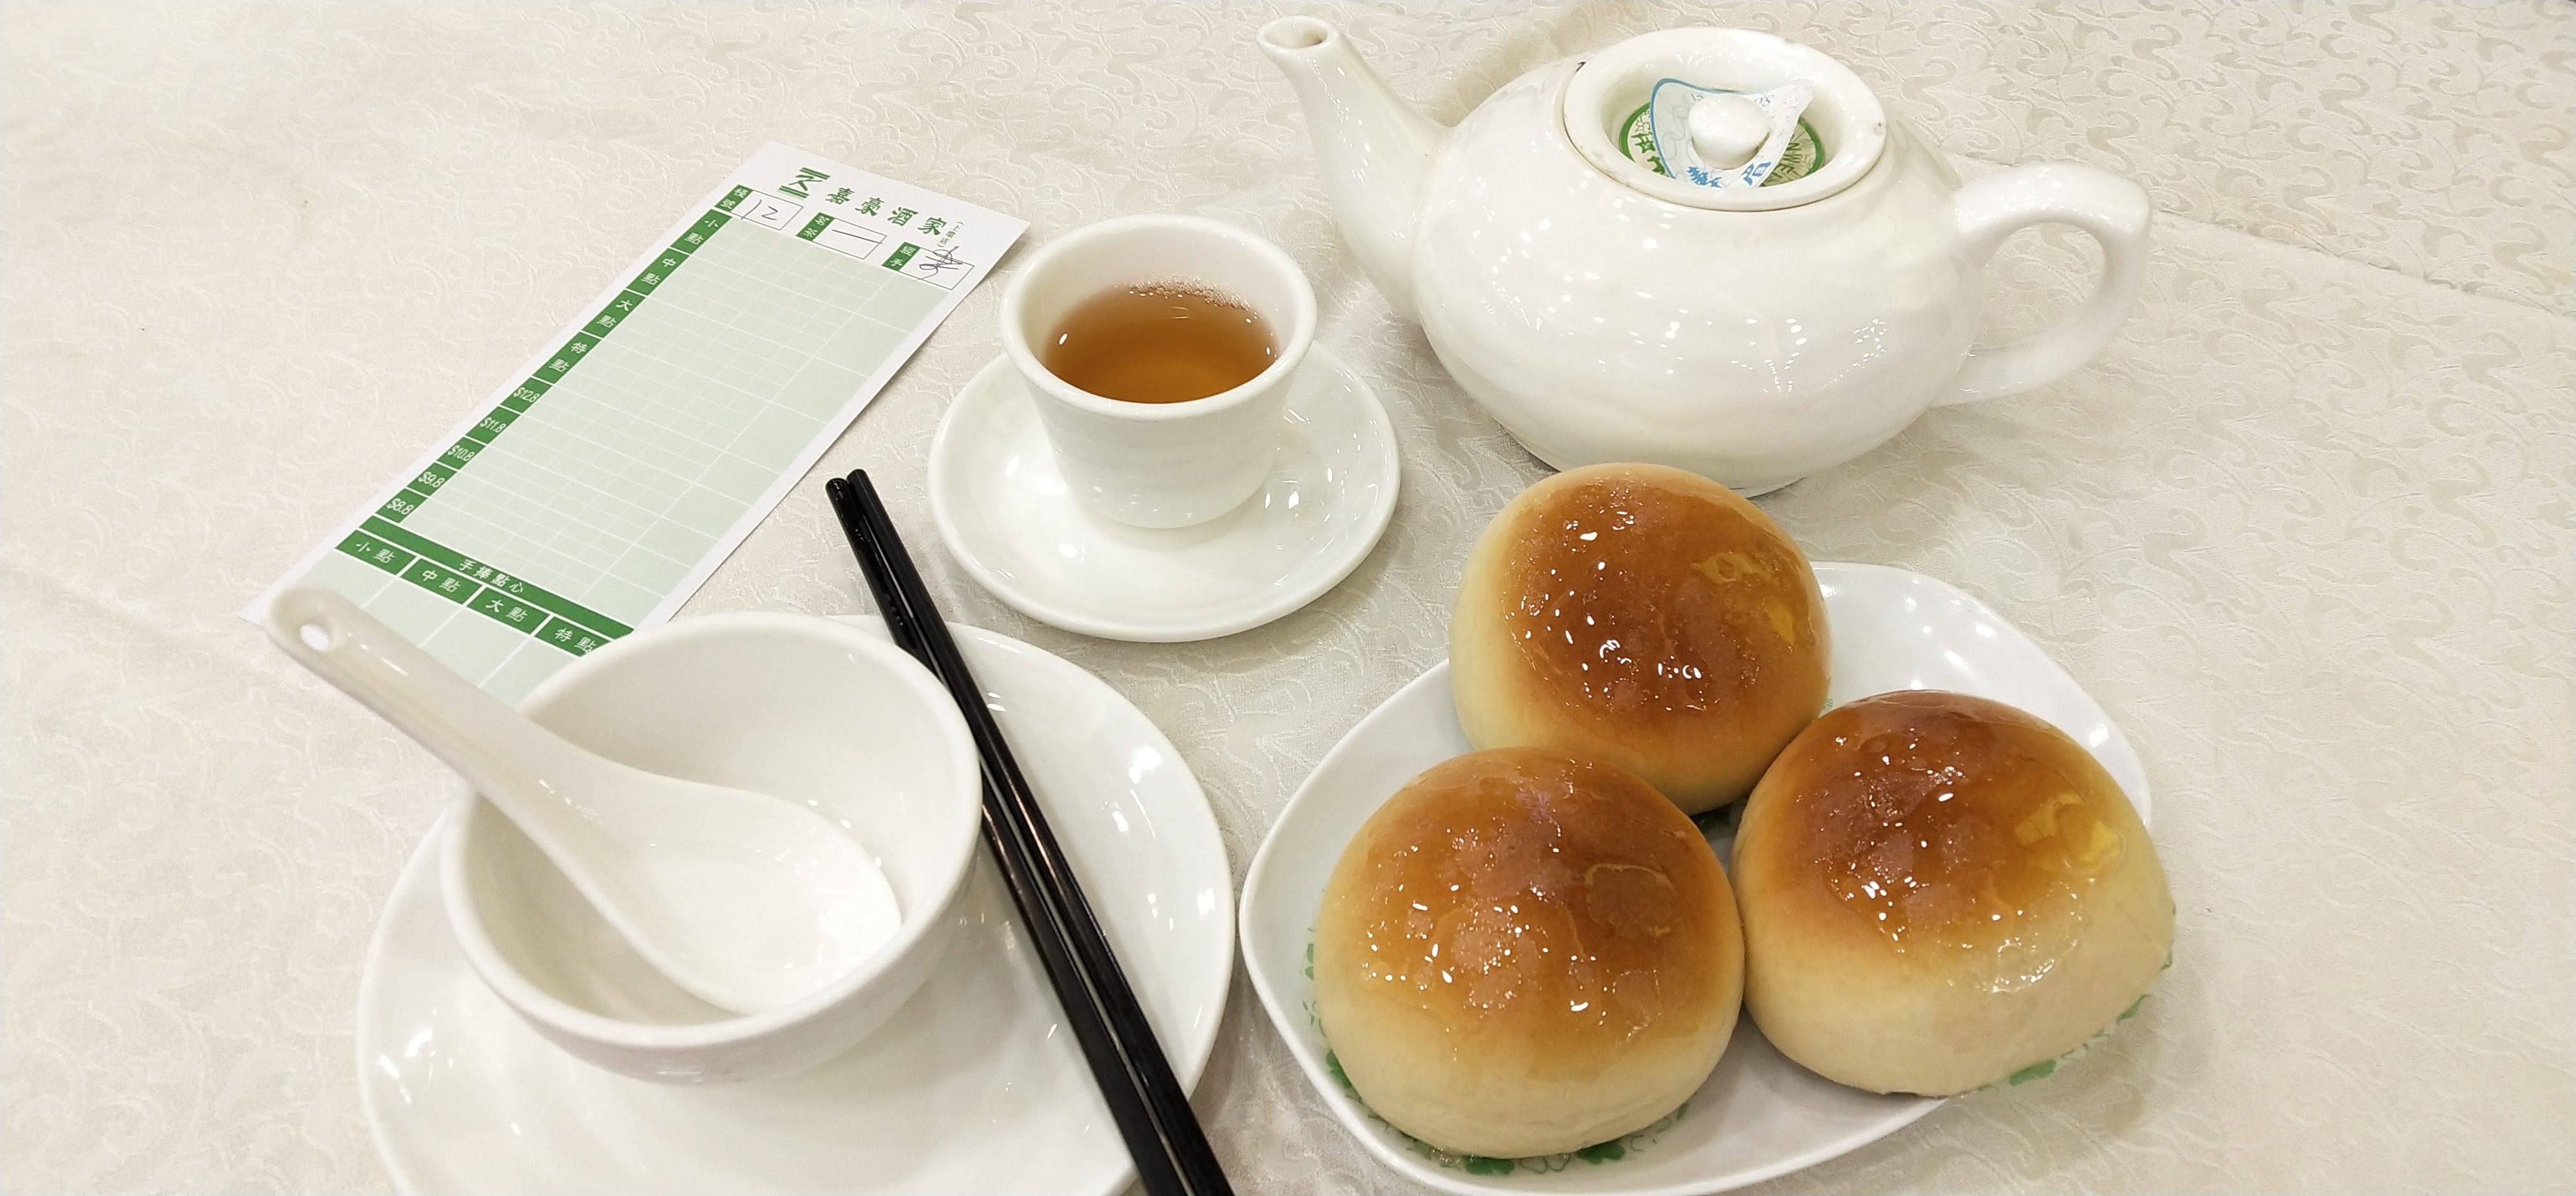 Western style bun and Chinese tea